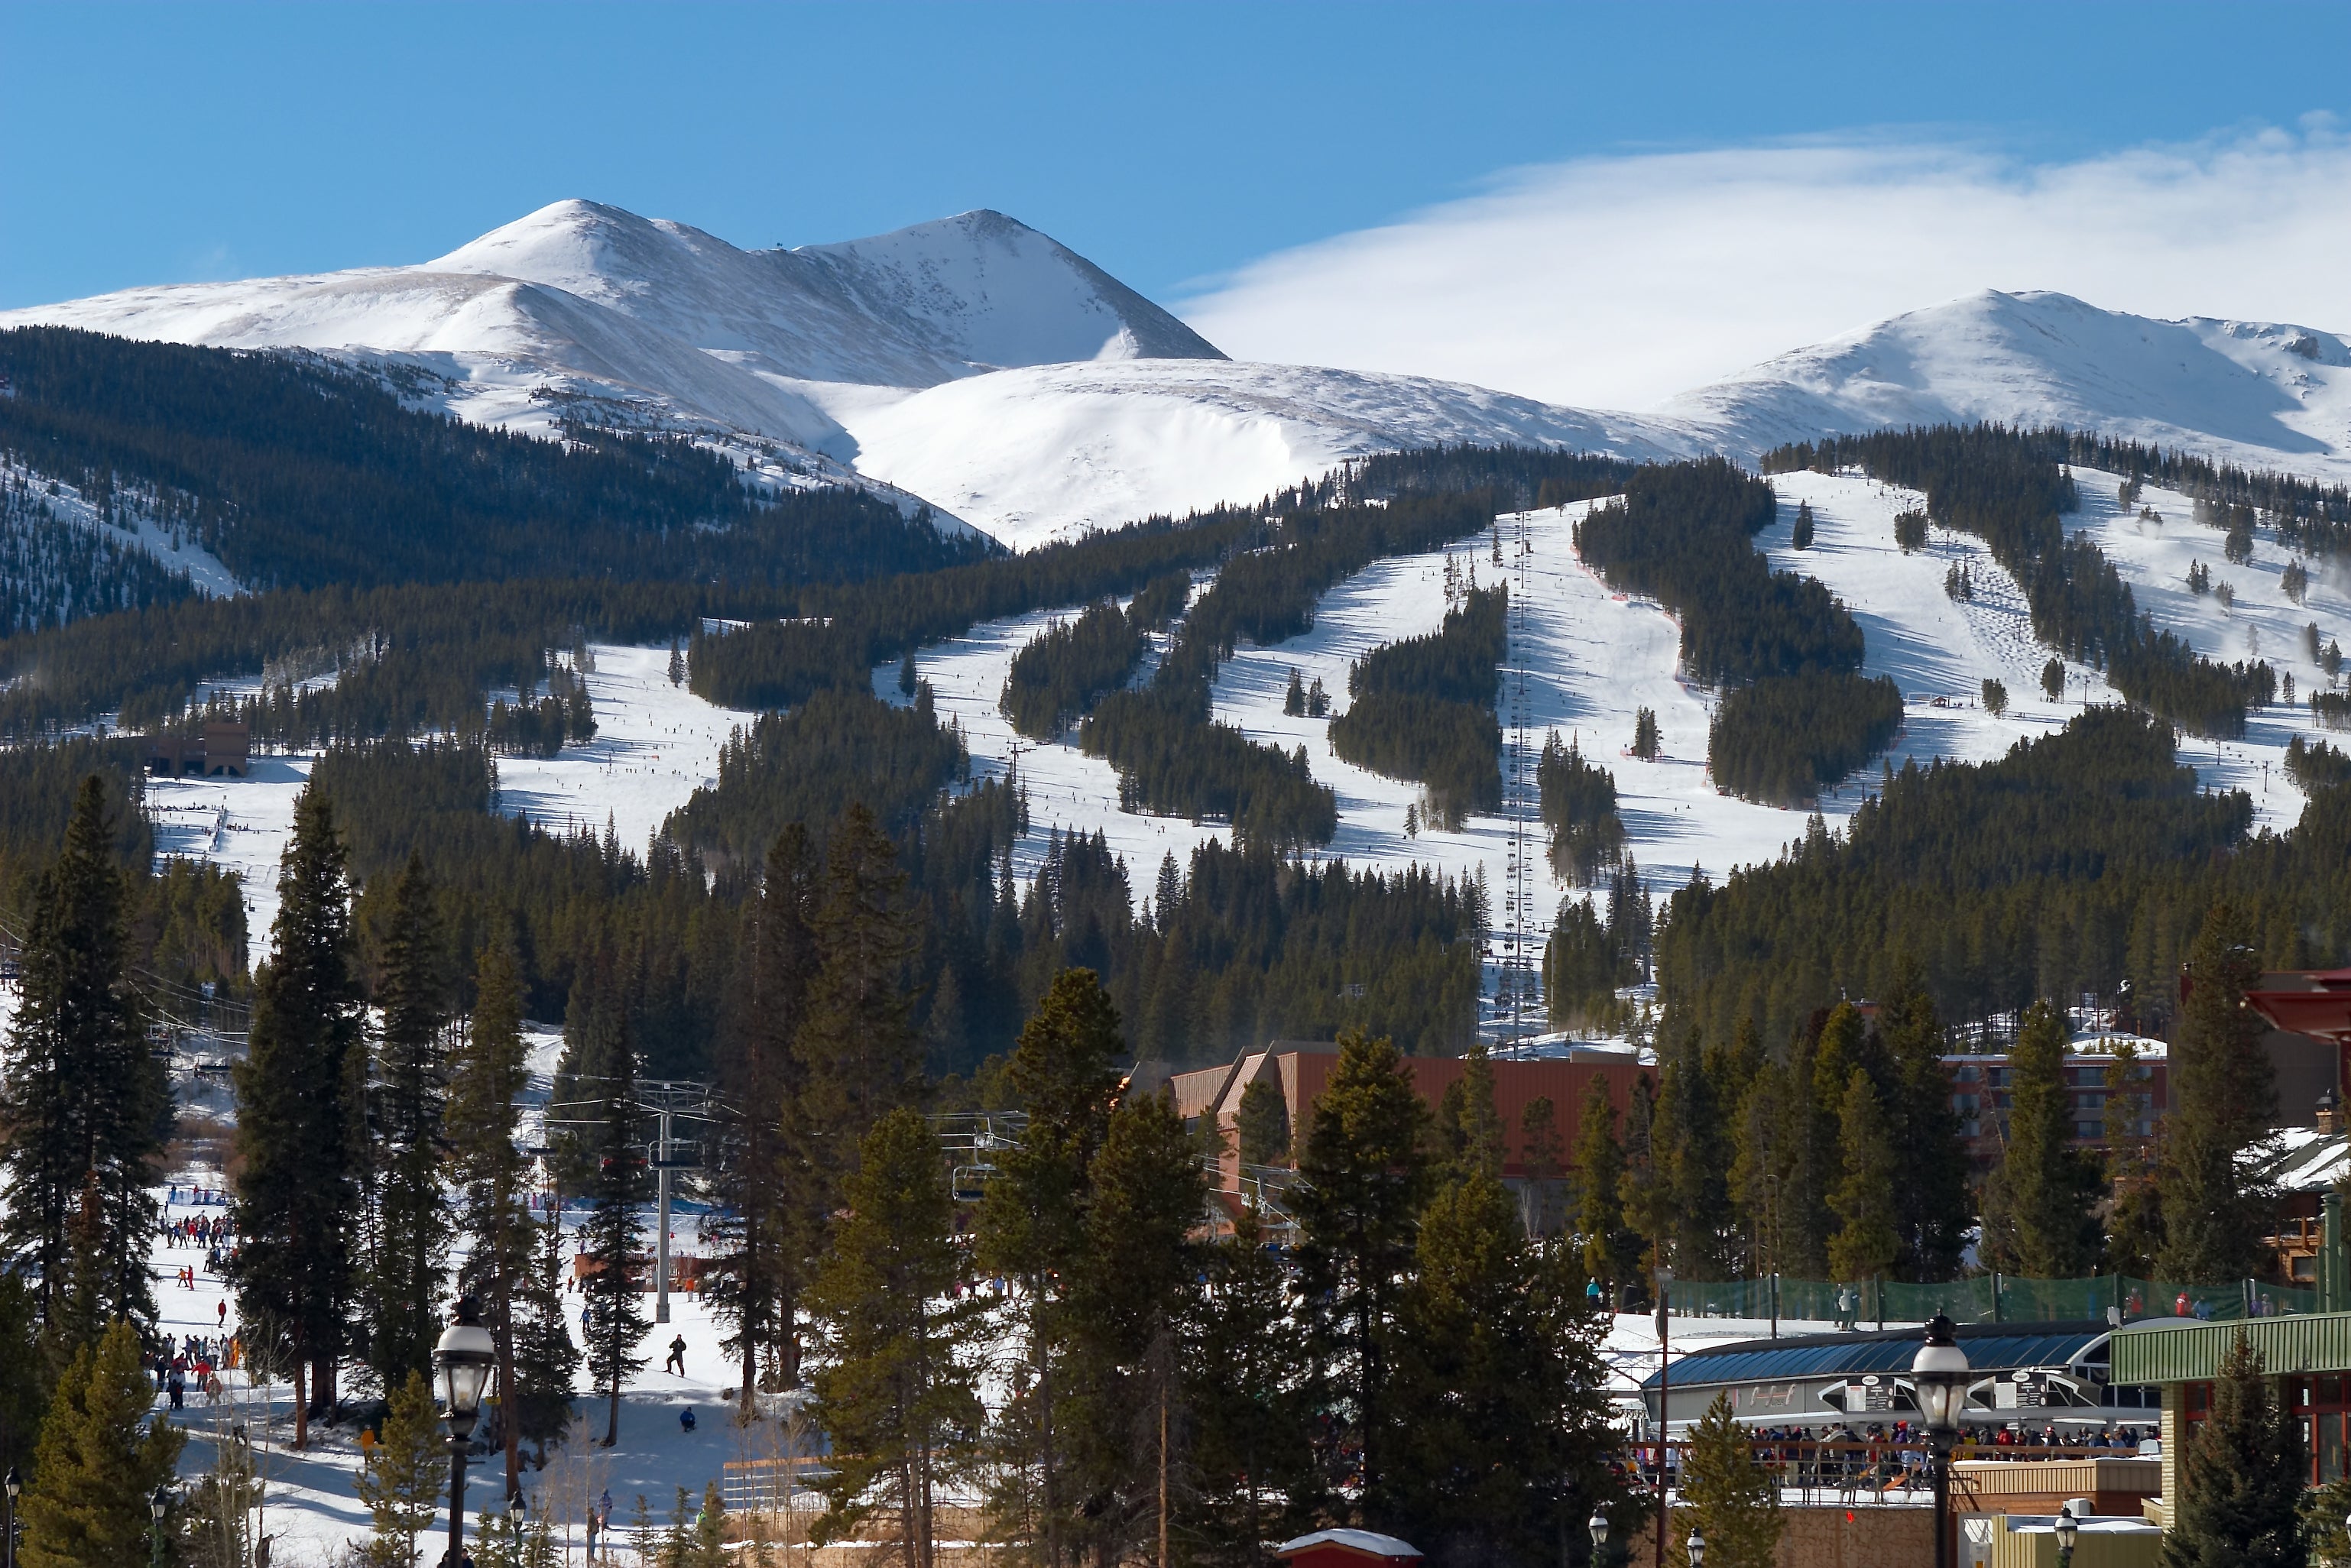 Cali goggle tans, a Wyoming winter wonderland and the champagne powder of Colorado await skiers in the USA